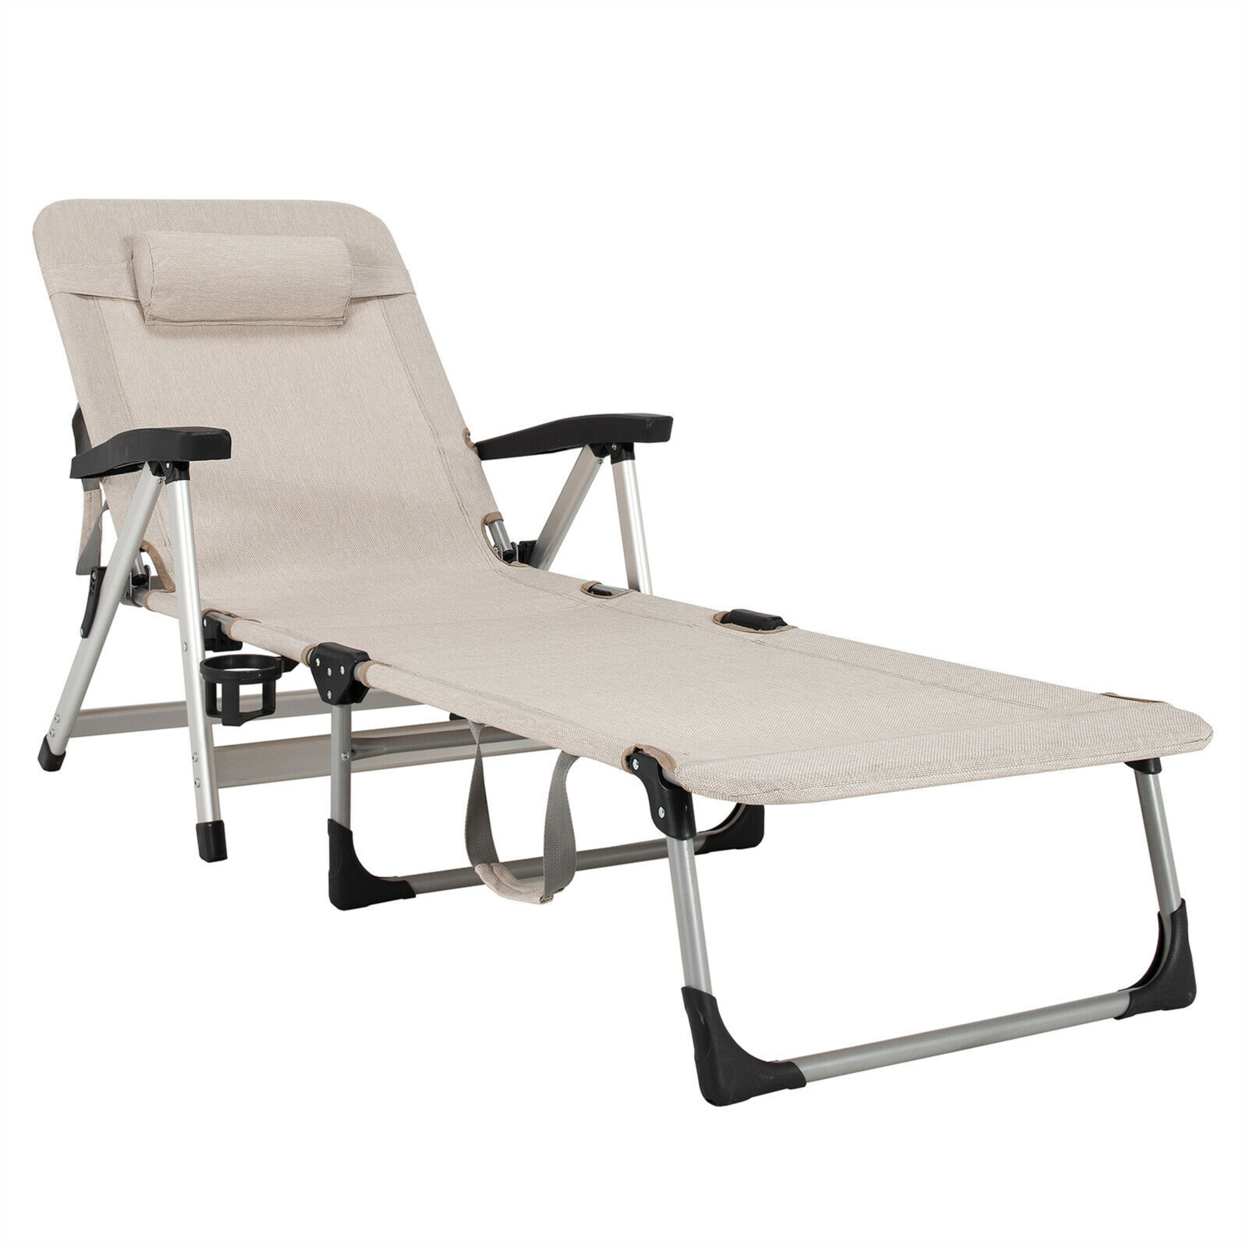 Beach Chaise Lounge Chair Patio Folding Recliner W/ 7 Adjustable Positions - Beige